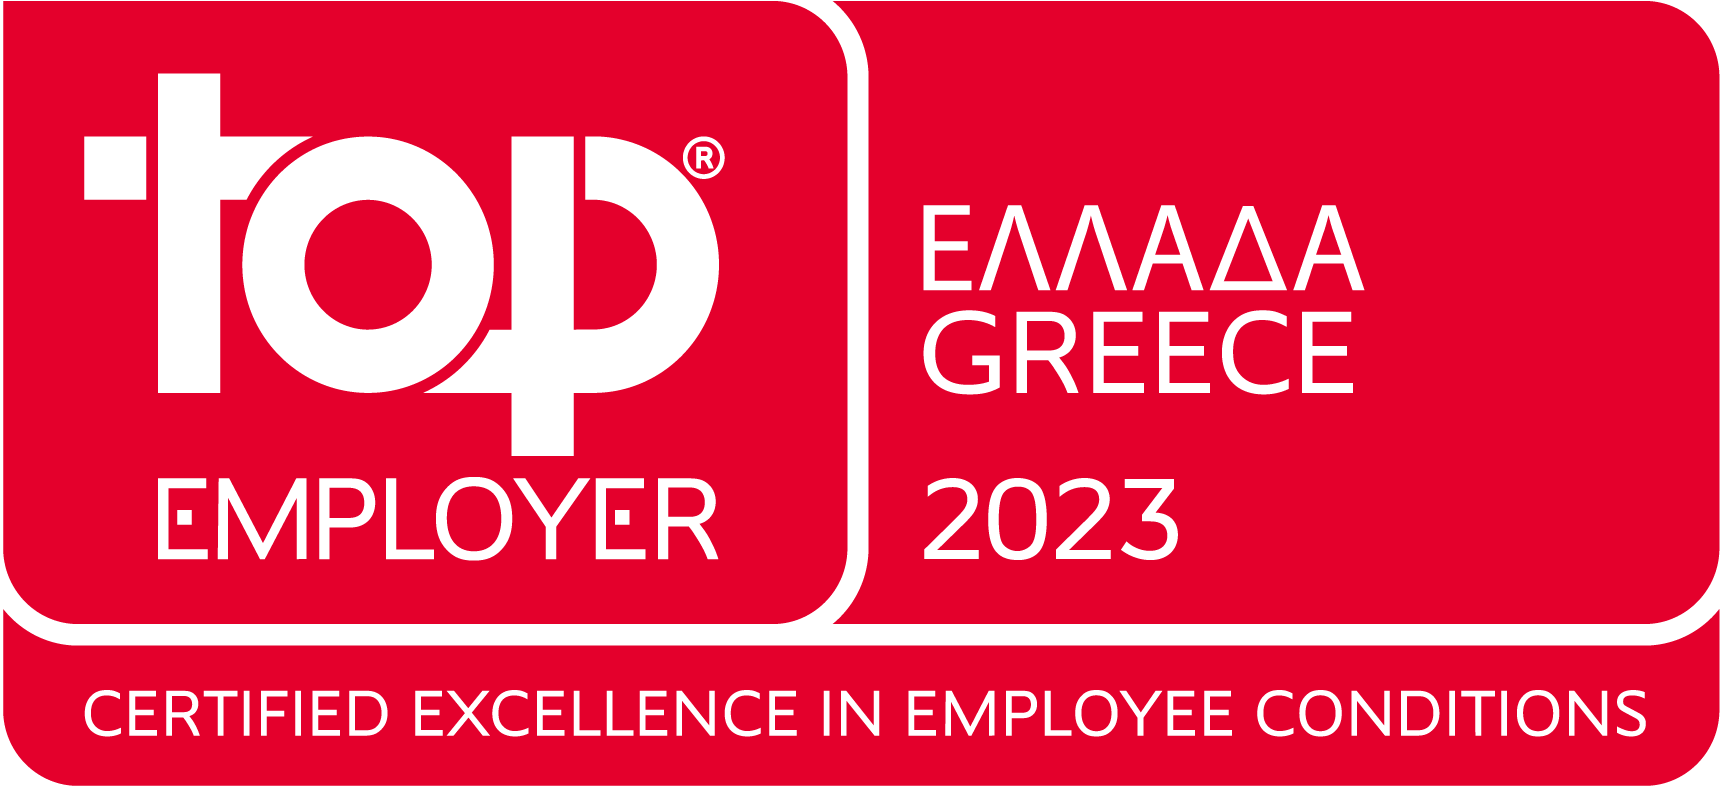 Top_Employer_Greece_2023.png